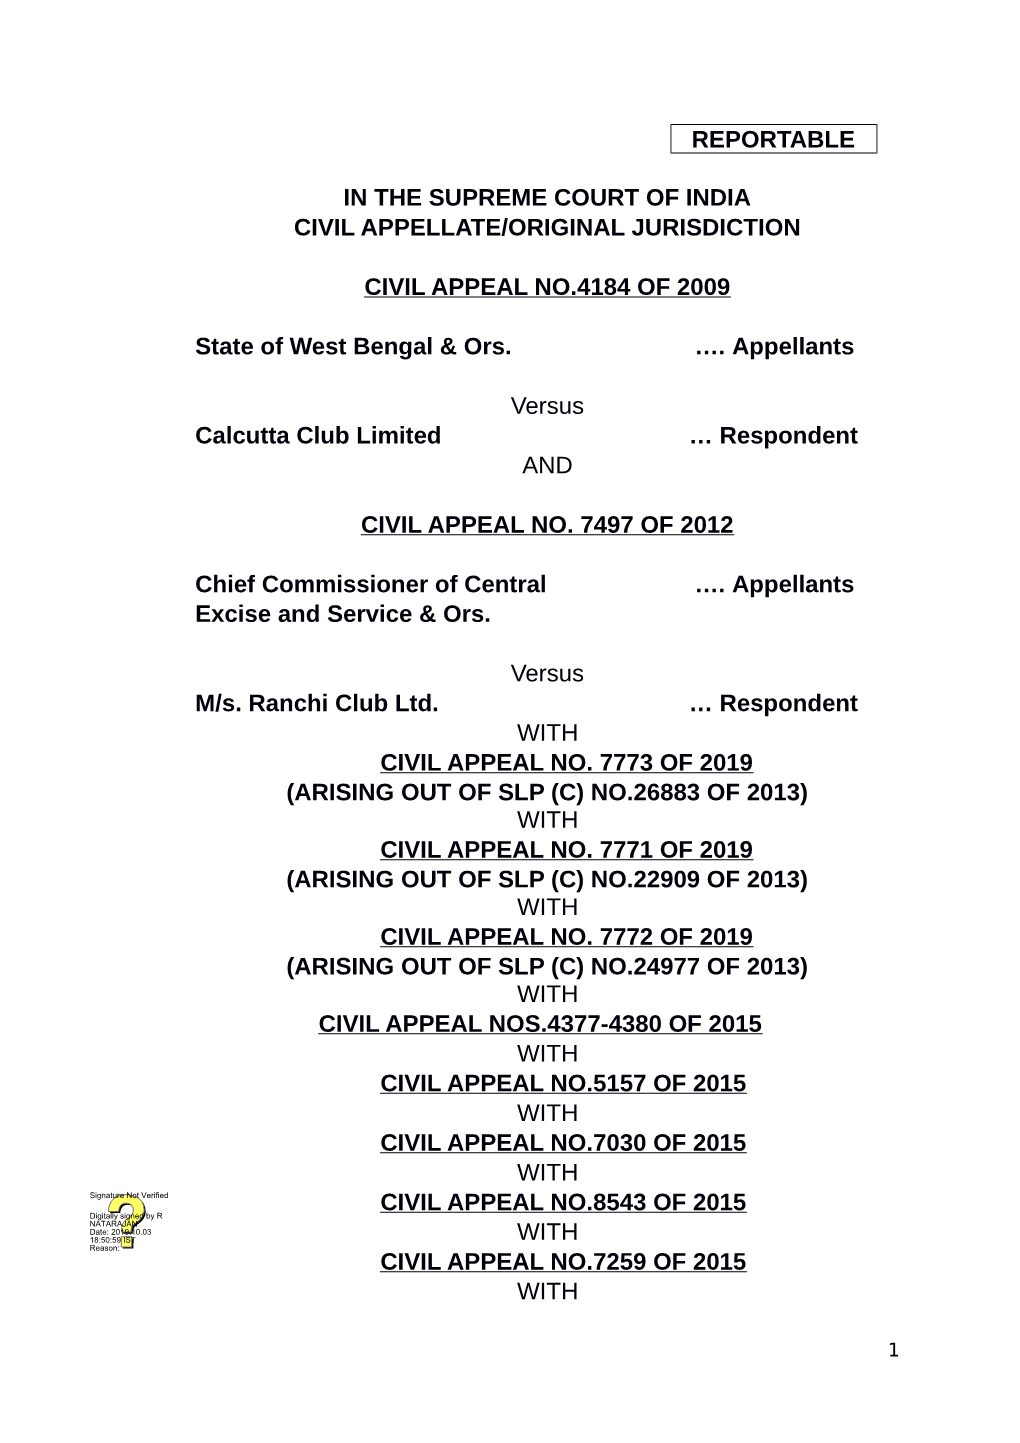 Case No. 1 State of West Bengal & Ors Vs Calcutta Club Limited